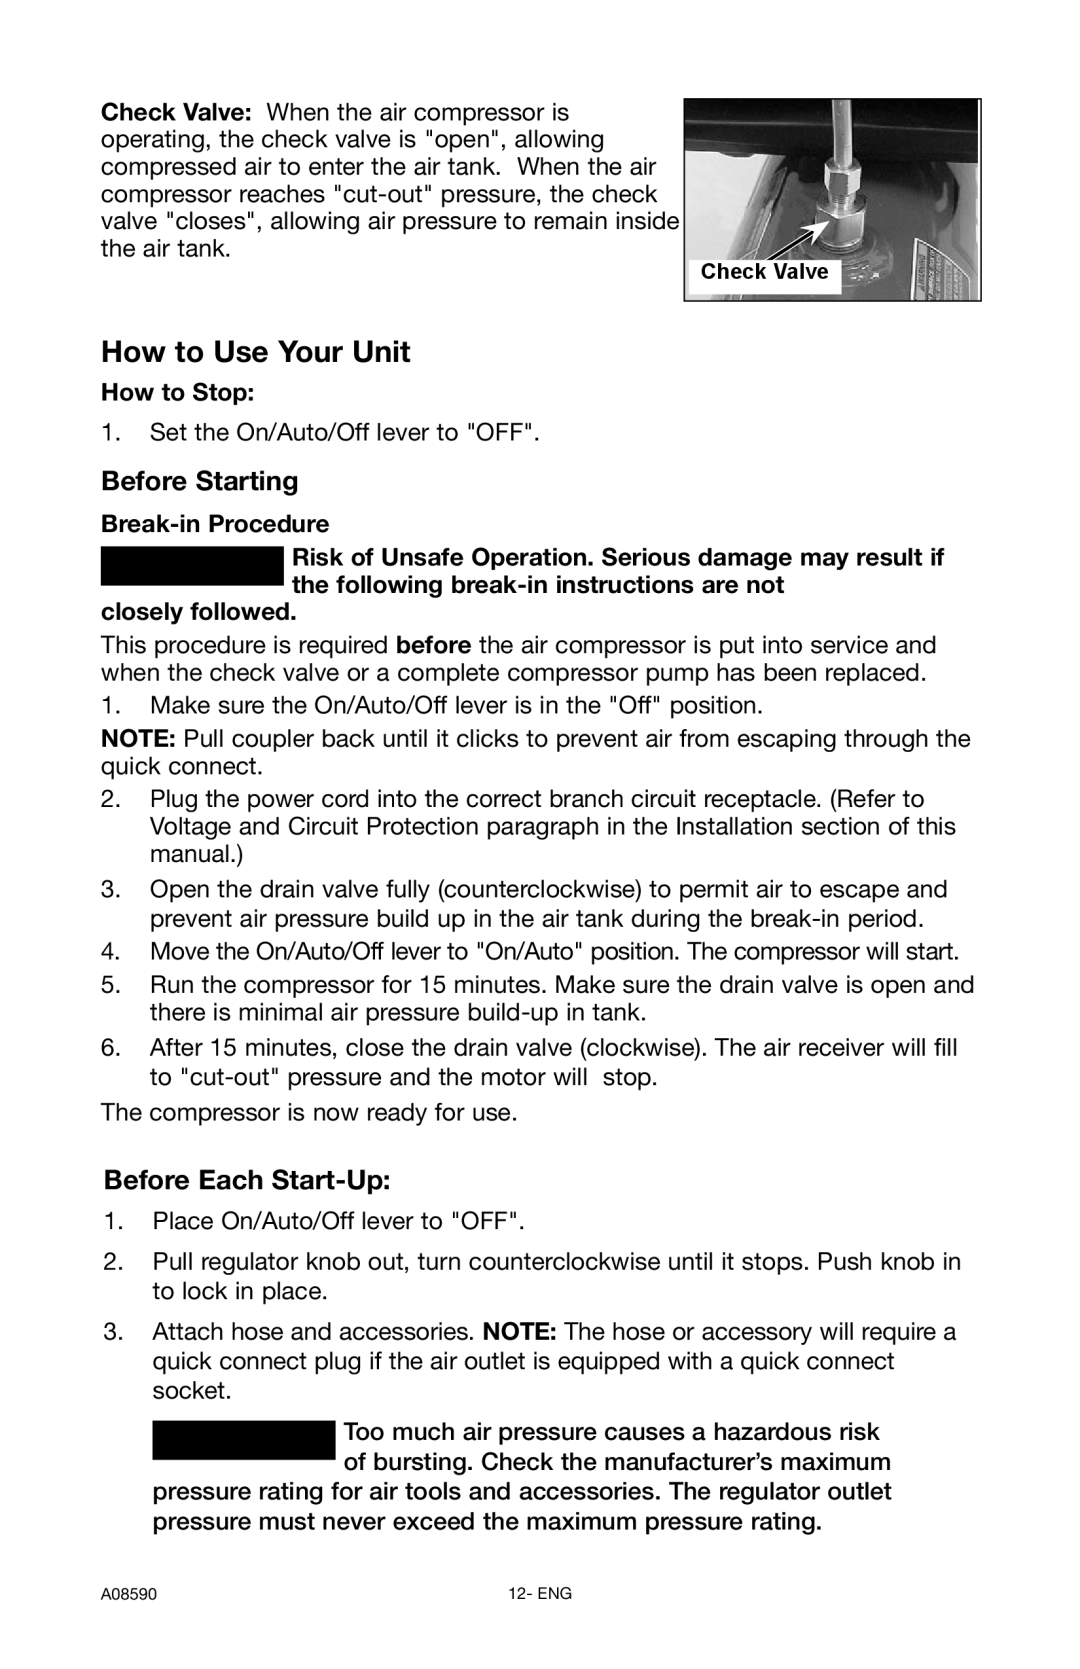 Delta A08590 instruction manual How to Use Your Unit, Before Starting, Before Each Start-Up 